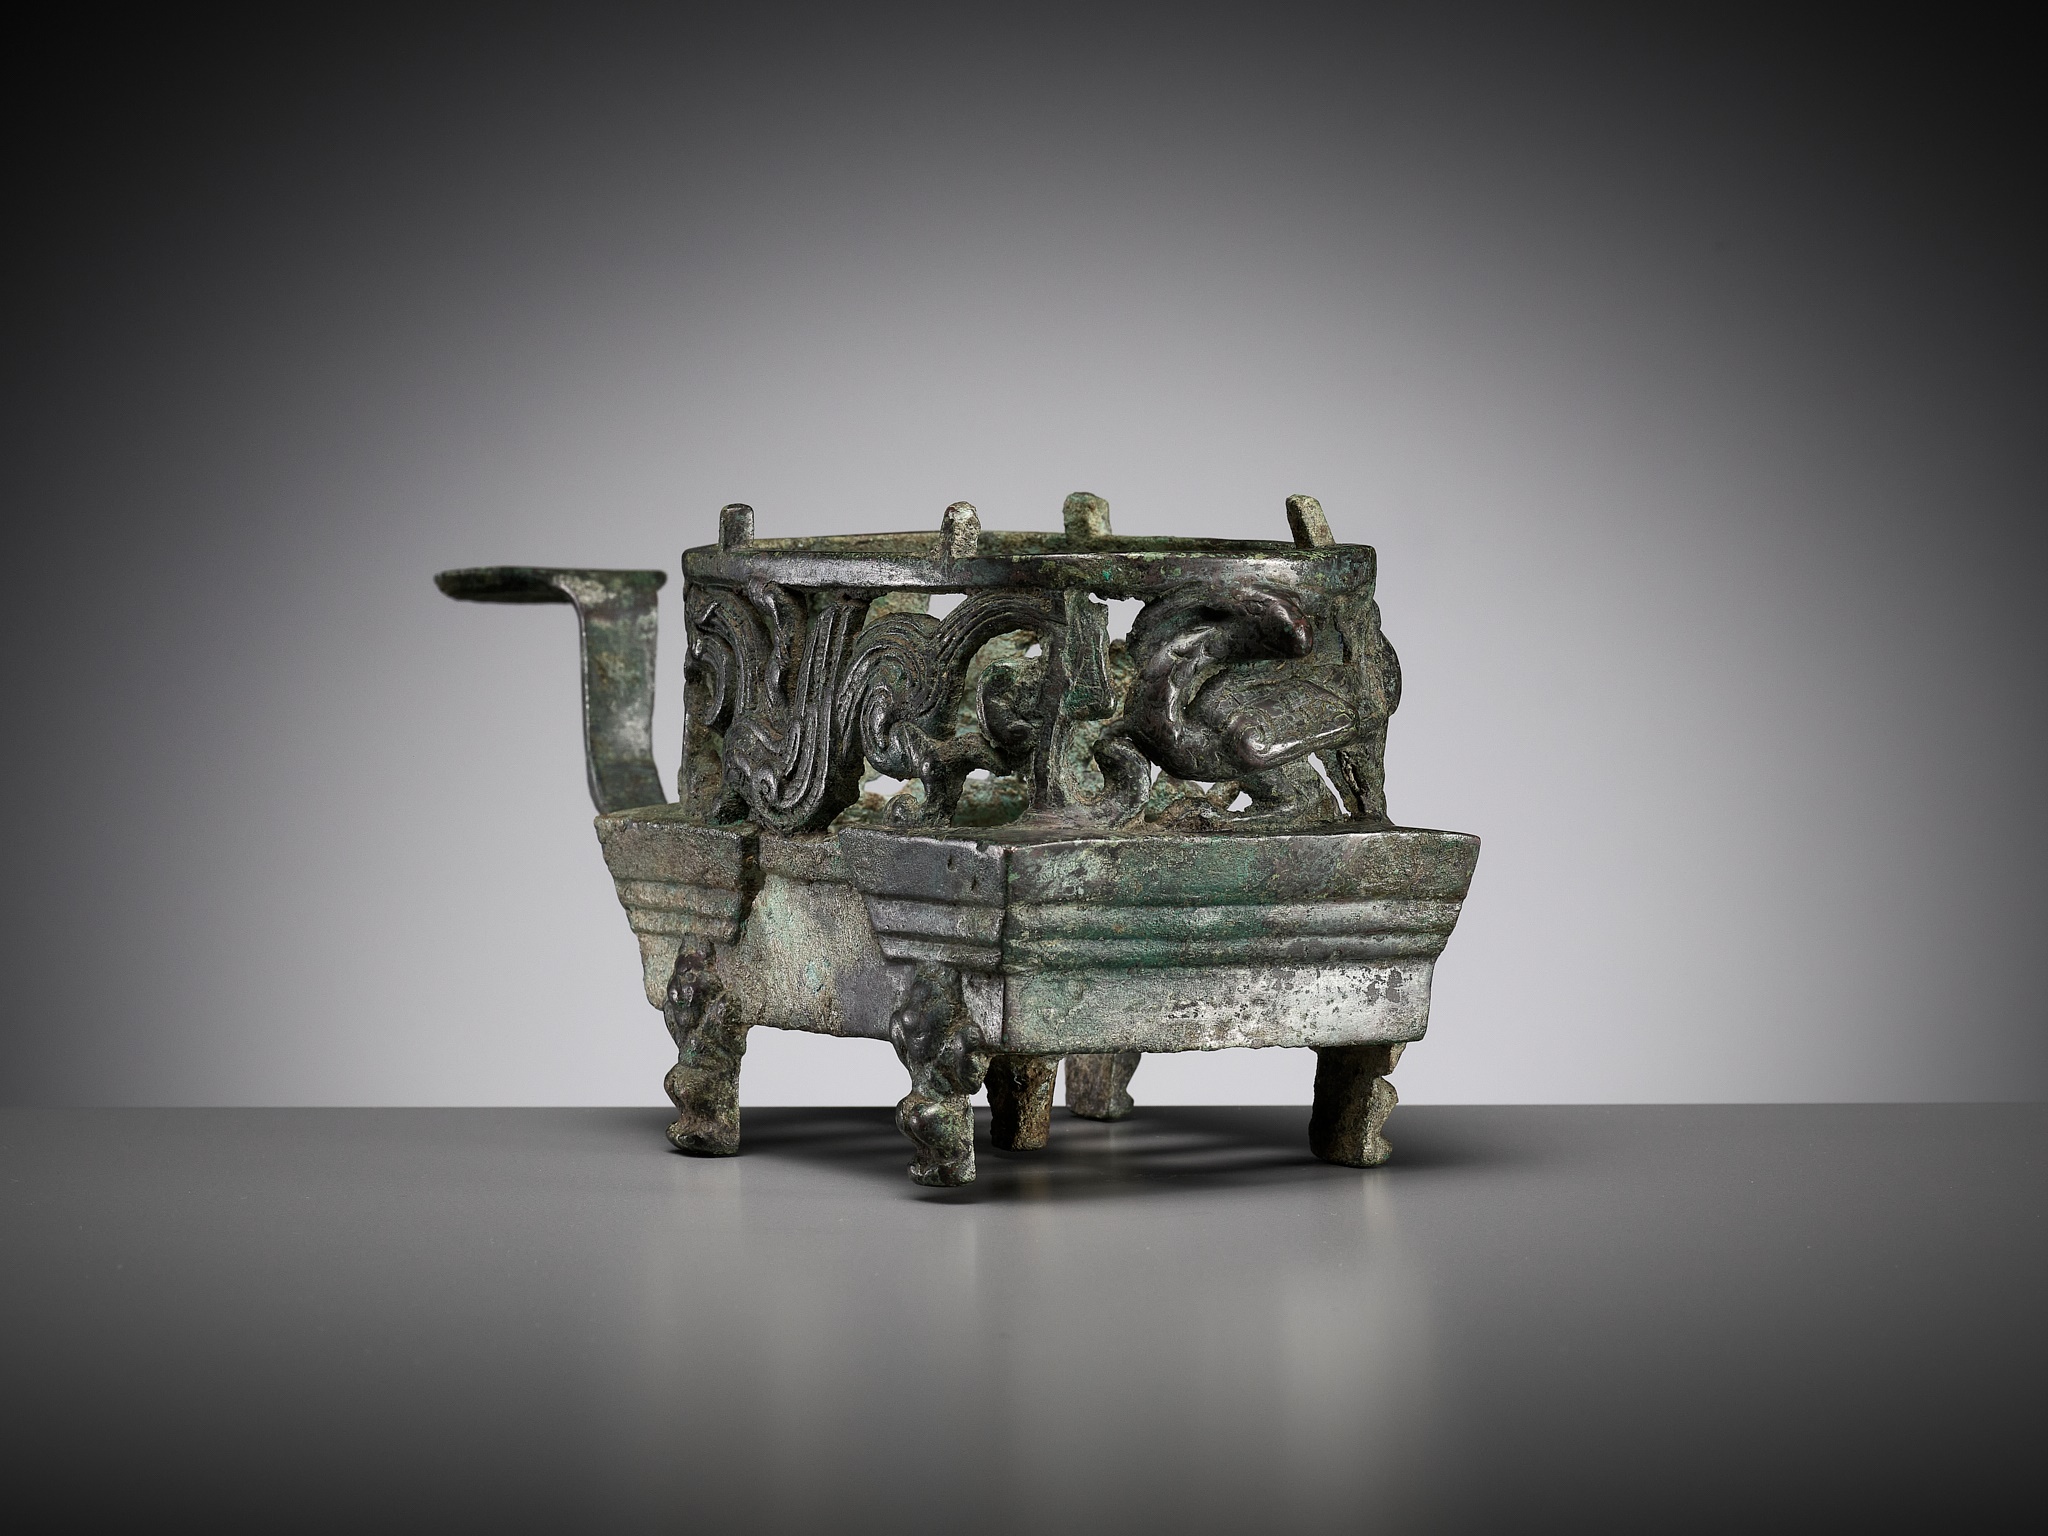 A 'FOUR AUSPICIOUS BEASTS' (SI XIANG) BRONZE BRAZIER, HAN DYNASTY, CHINA, 206 BC-220 AD - Image 11 of 16